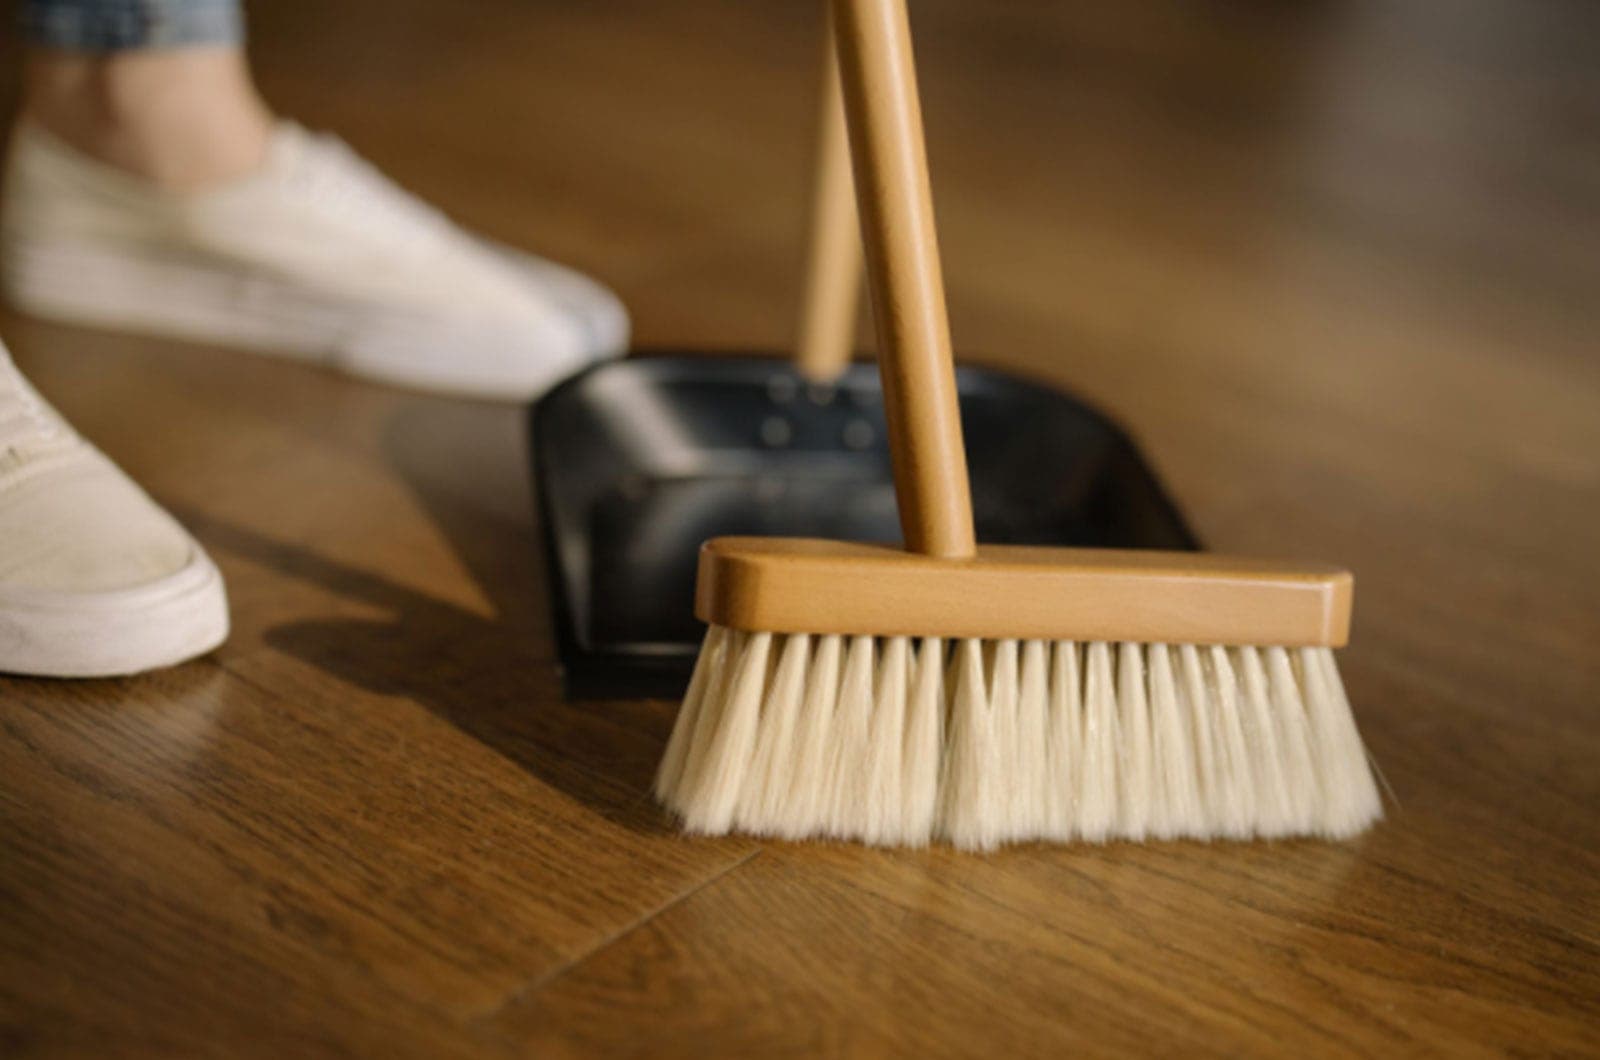 A woman with a broom sweeping into a dustpan